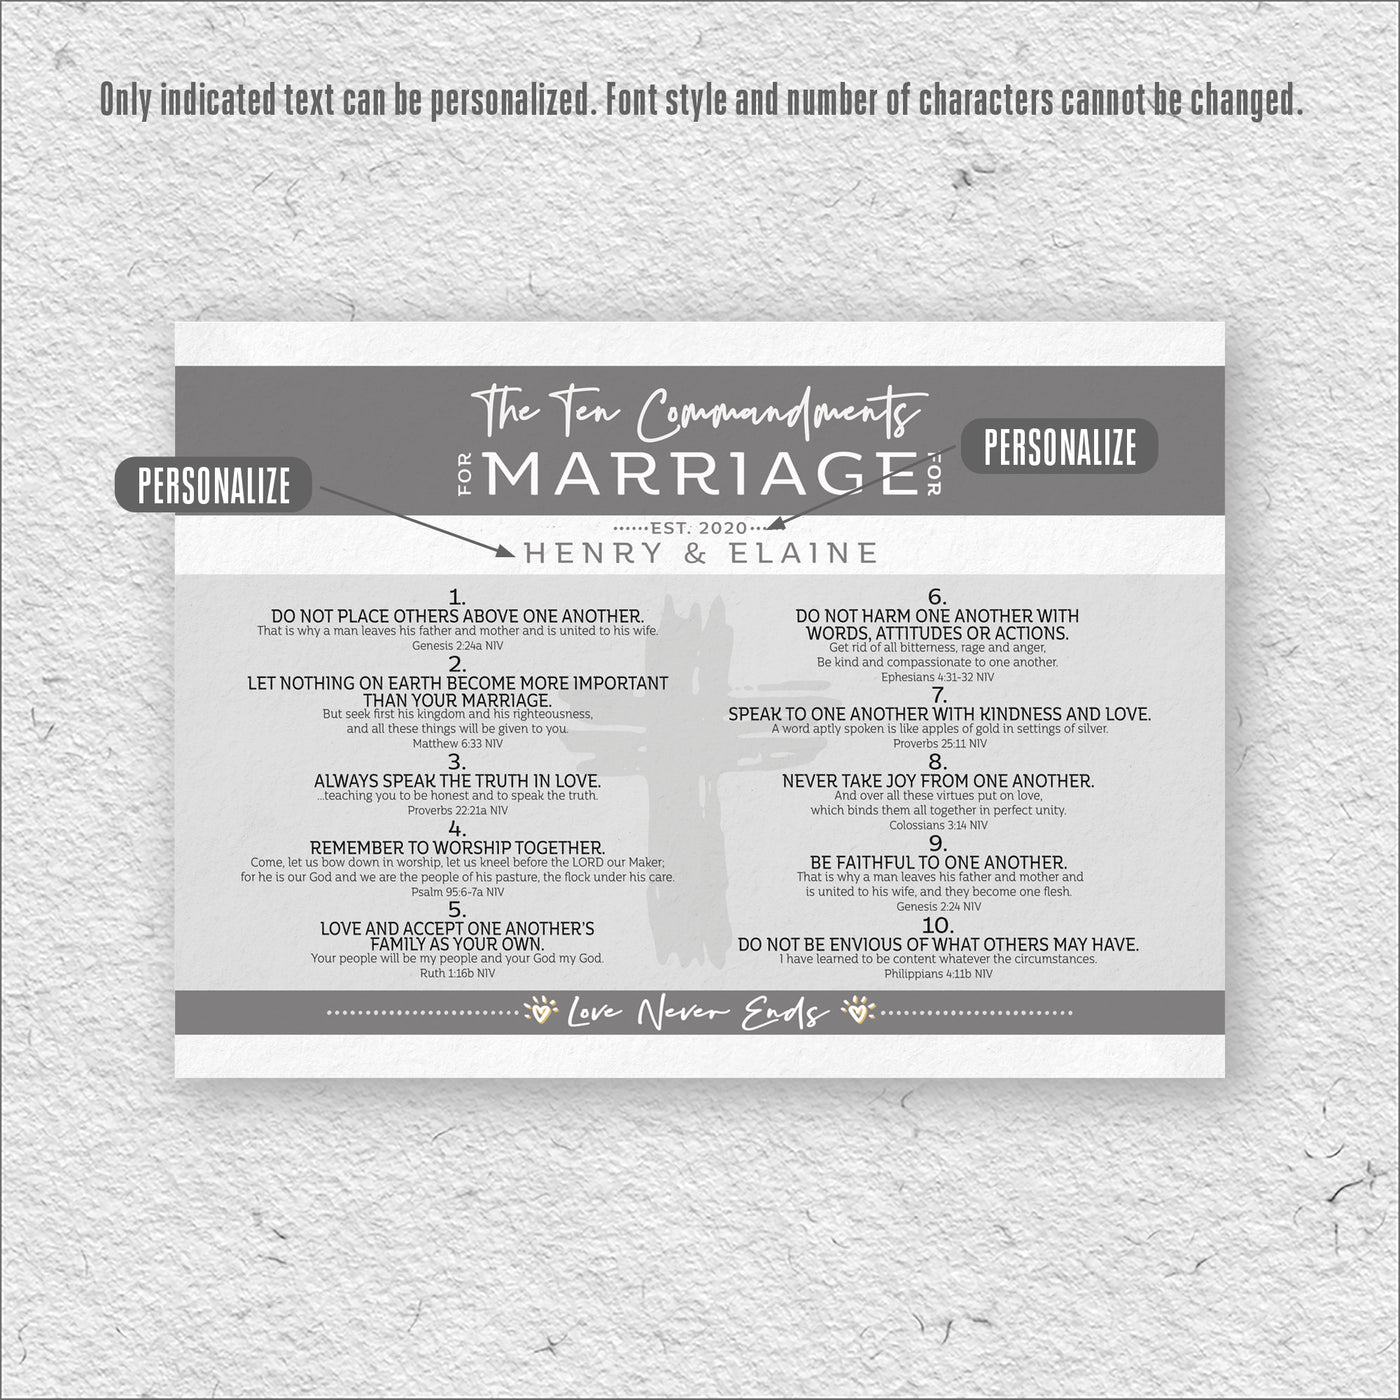 10 Commandments for Marriage personalization